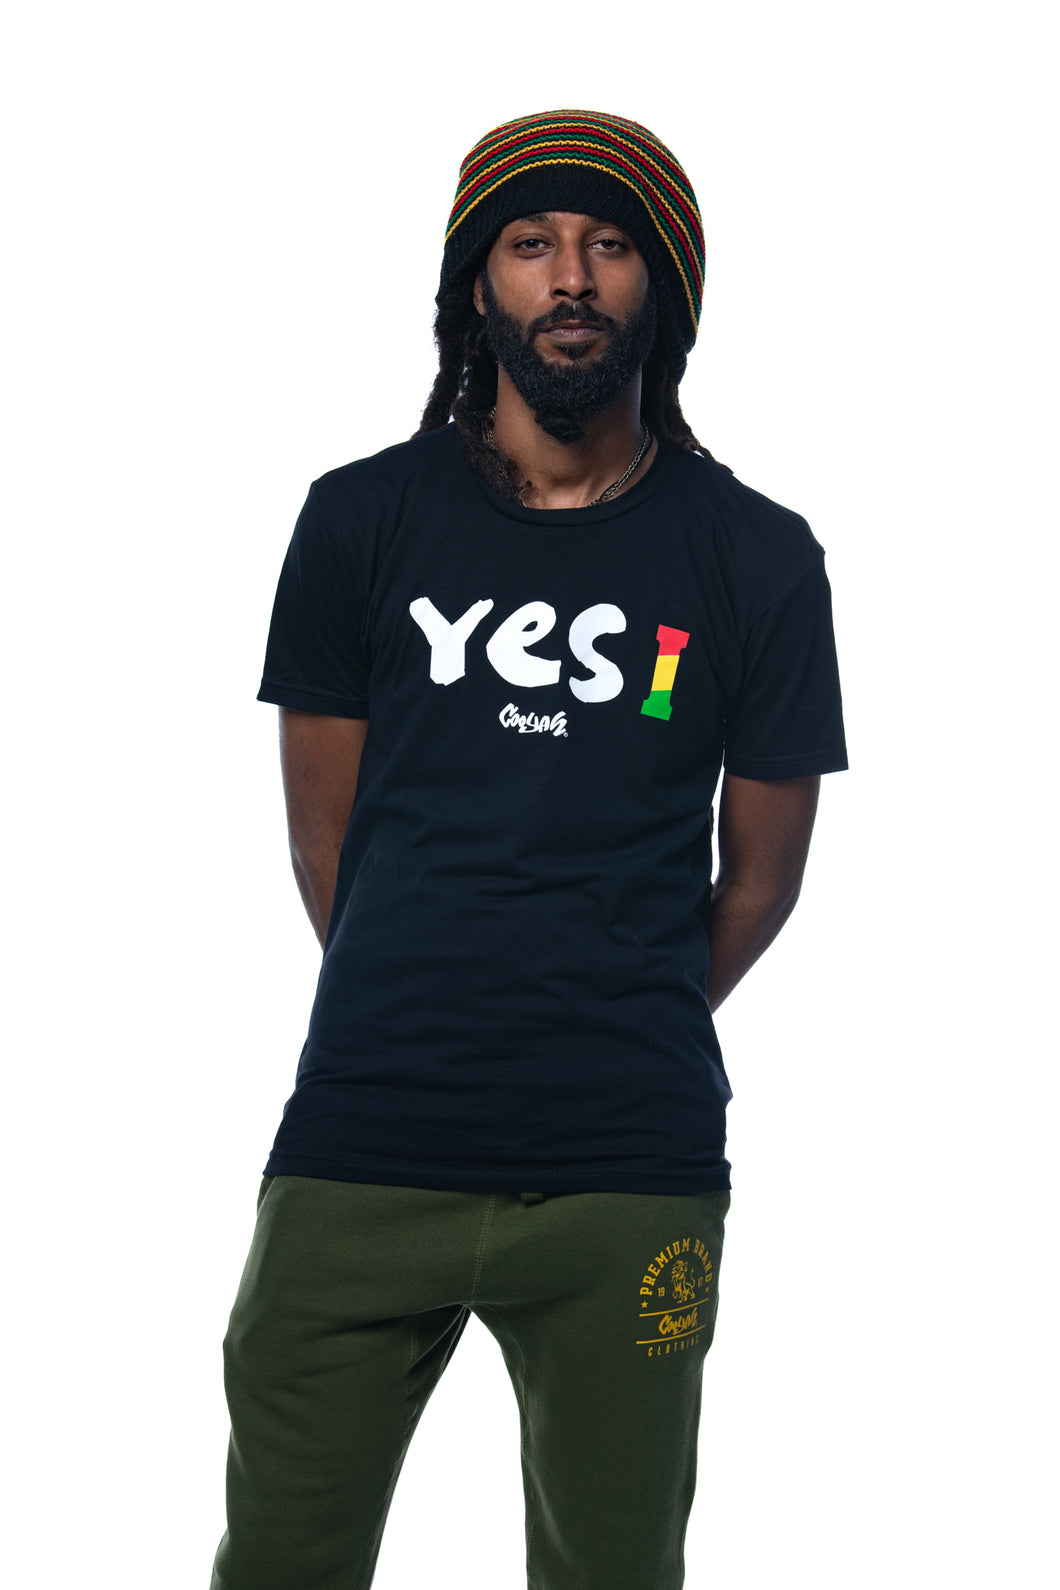 Cooyah Jamaica. Men's short sleeve tee with Yes I graphic. Black t-shirt screen printed in rasta colors. Reggae style. Jamaican clothing band. IRIE